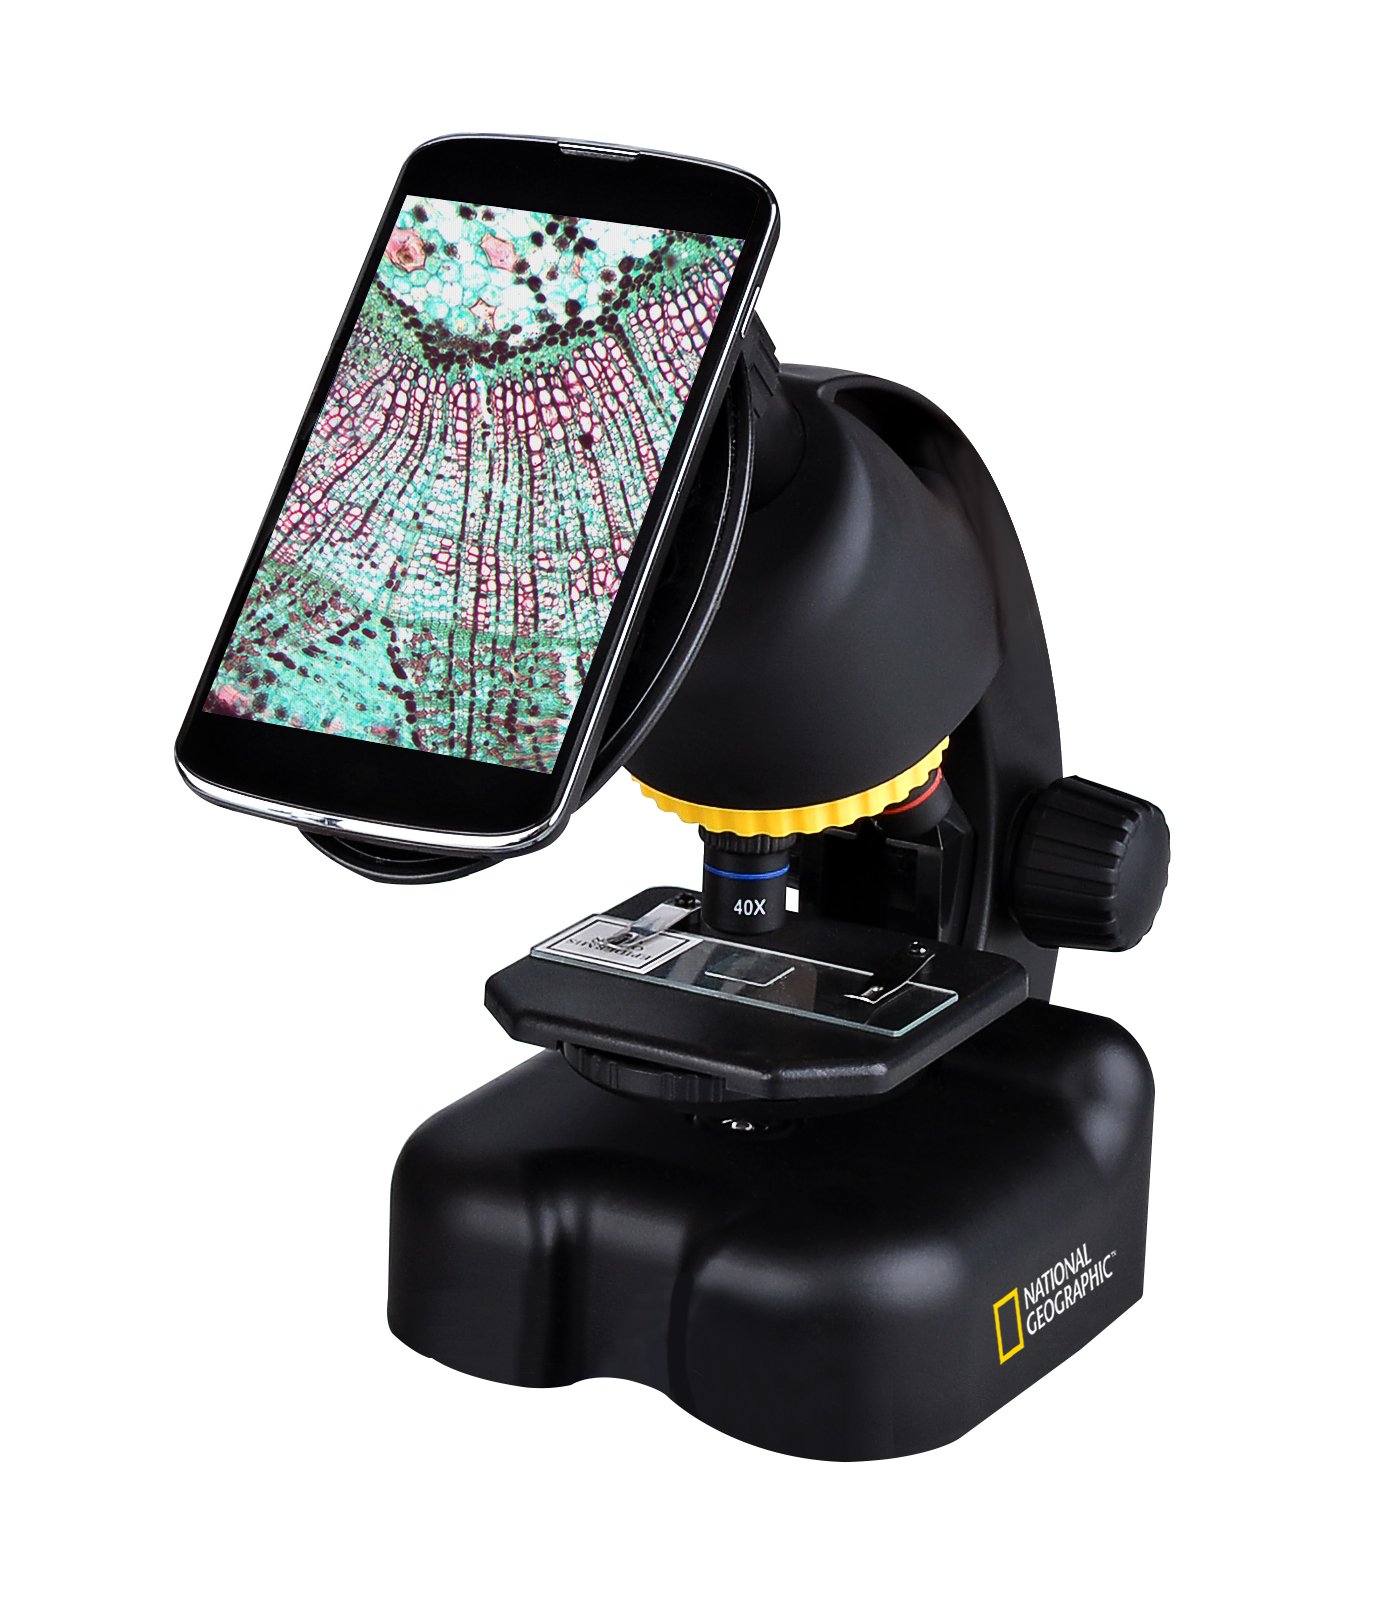 Télescope + microscope compacts NATIONAL GEOGRAPHIC avec support de smartphone